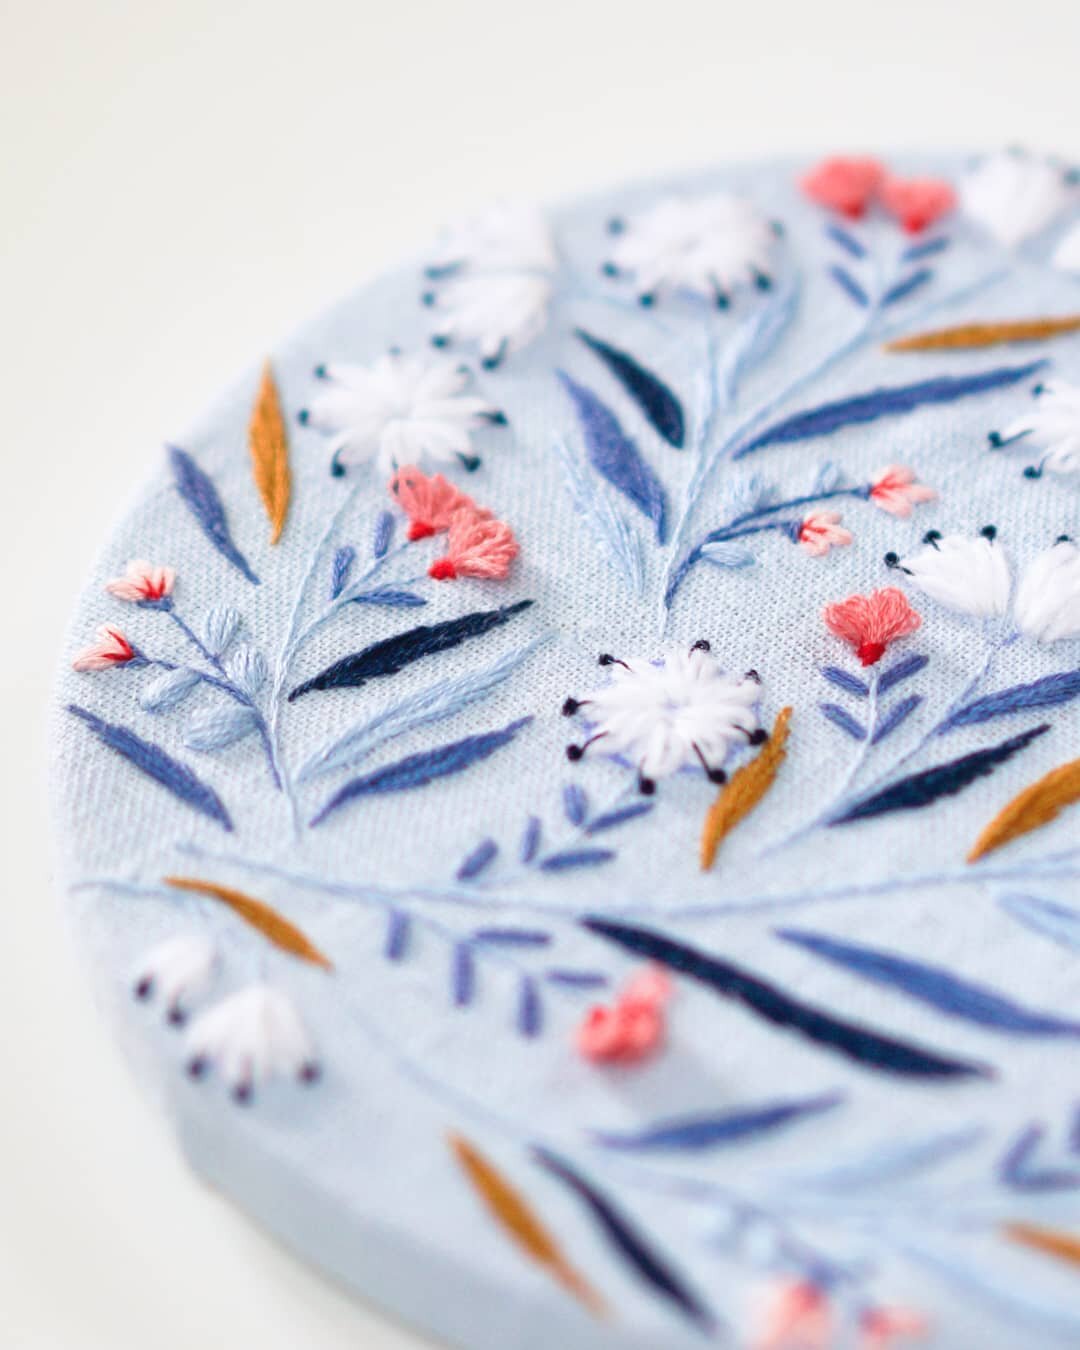 All about those details 🌼
.
.
.
.
#handembroidery #bordados #hoopart #britishstitchers #diyembroidery #embroideryart #slowcraft #handmadeembroidery #embroideredtreasures #crafternoon #embroiderykit #floralembroidery #embroiderypattern #makeallthethi